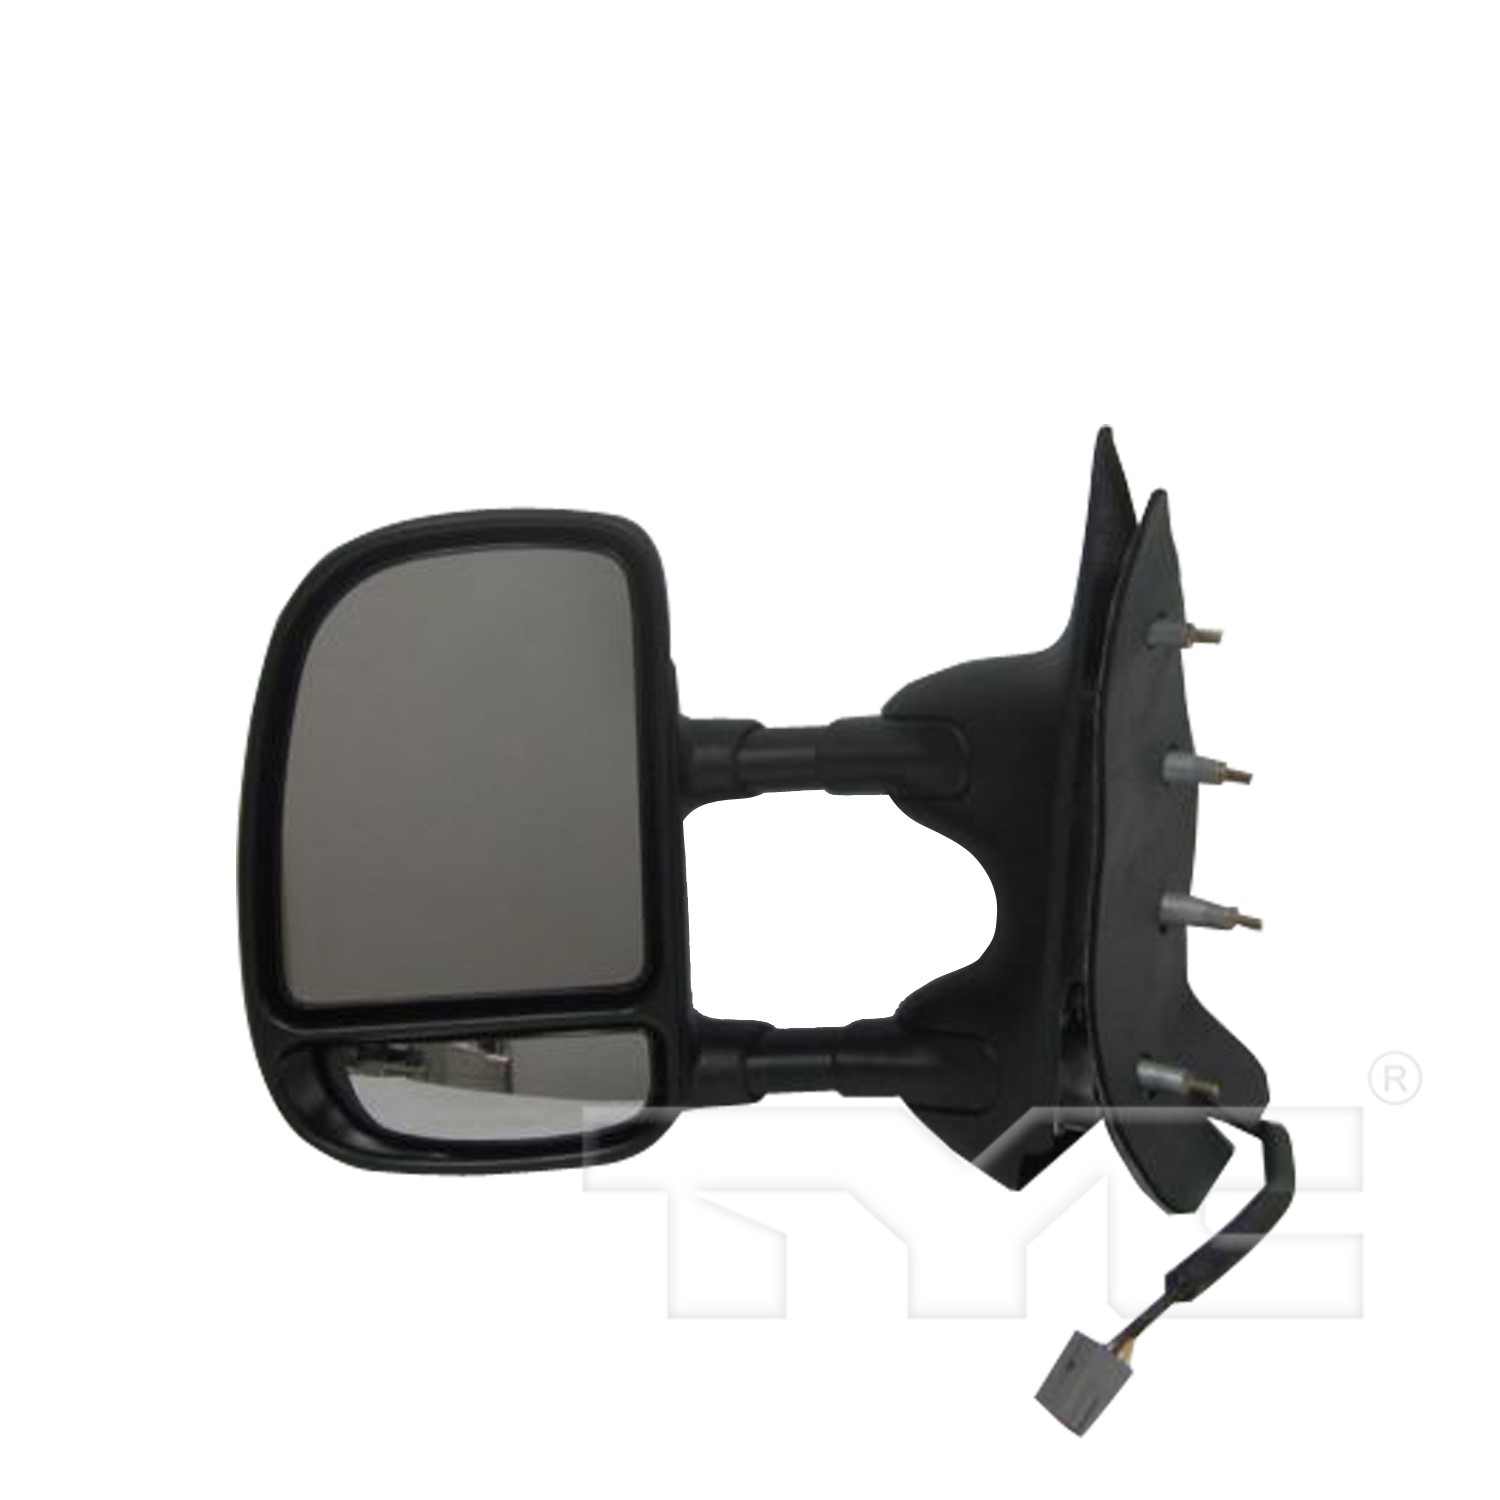 Aftermarket MIRRORS for FORD - E-350 SUPER DUTY, E-350 SUPER DUTY,09-14,LT Mirror outside rear view